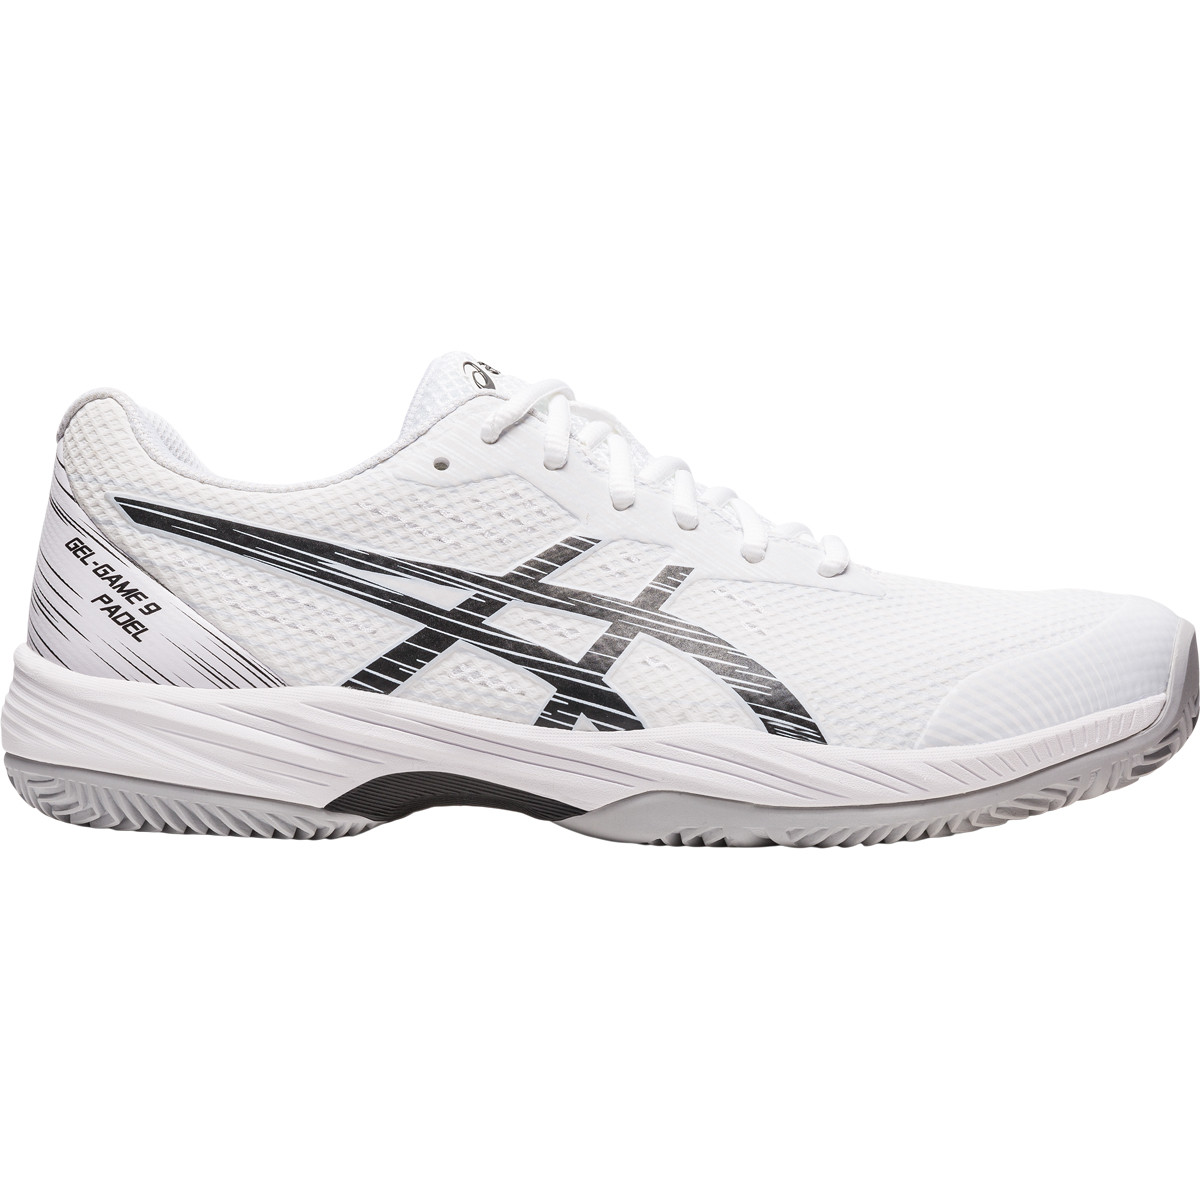 ASICS GAME 9 PADEL CLAY COURT SHOES - ASICS - Shoes - Padel | Tennispro